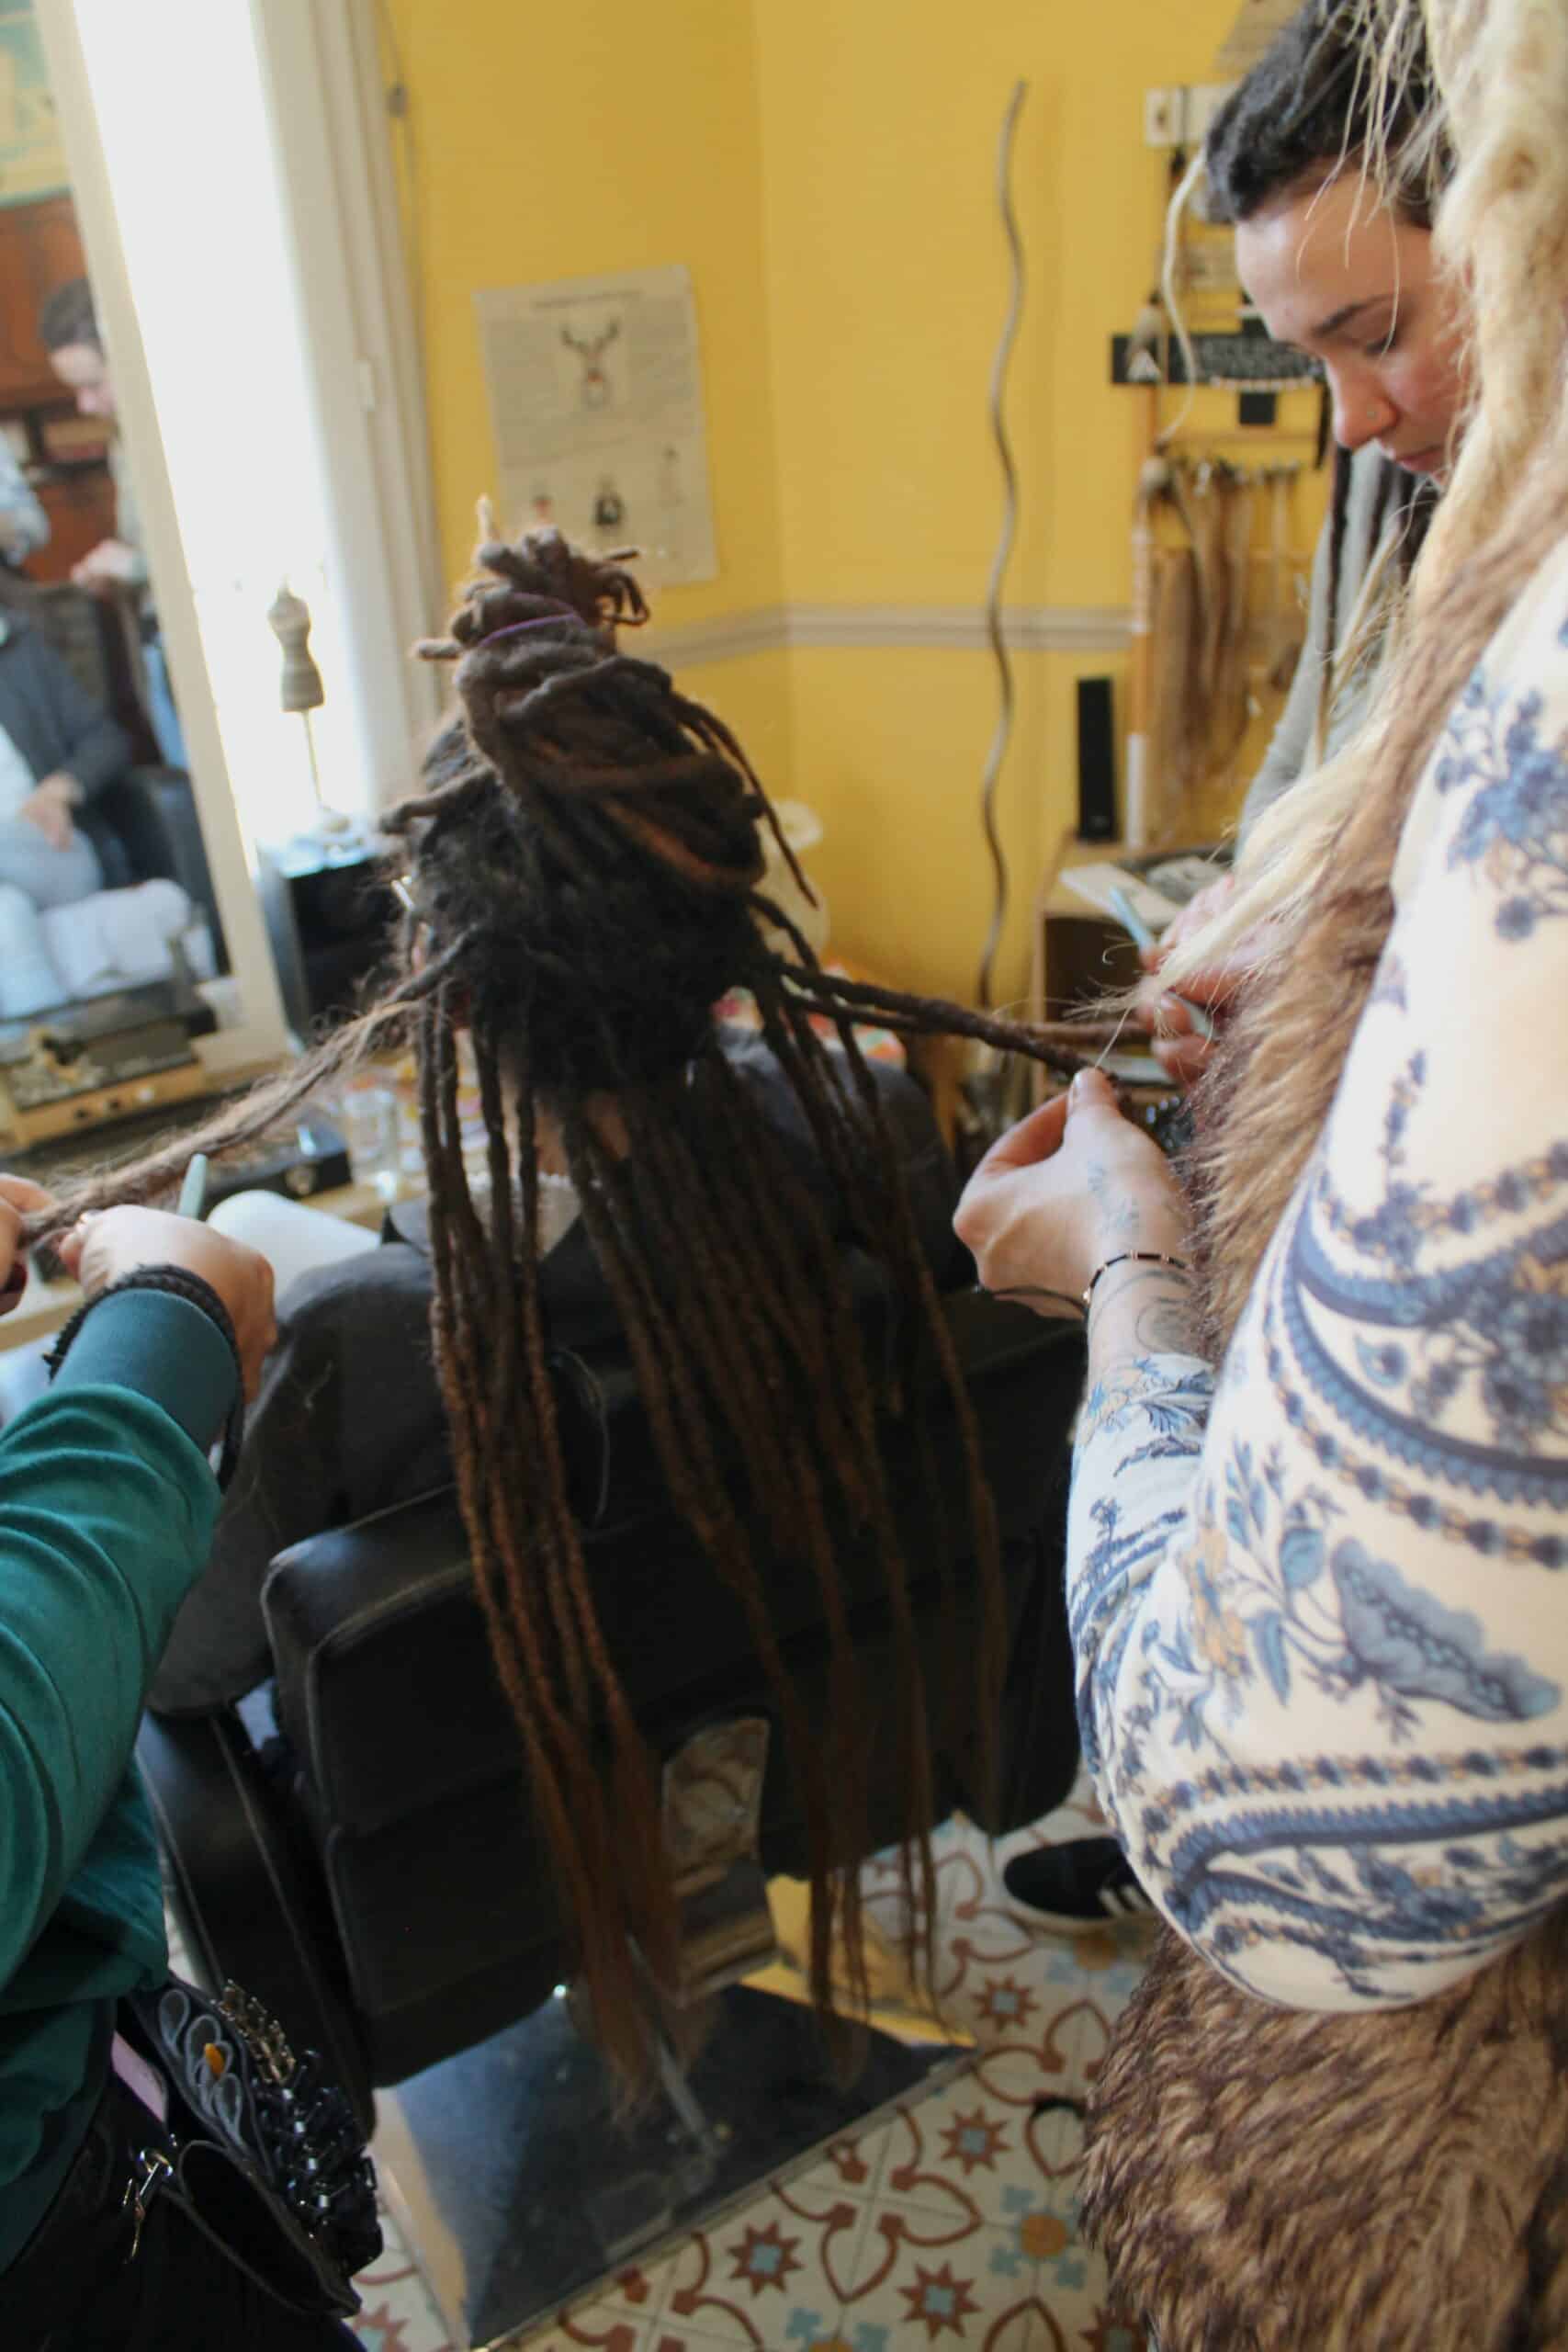 Learn how to create and maintain natural dreads from an expert. Lisah